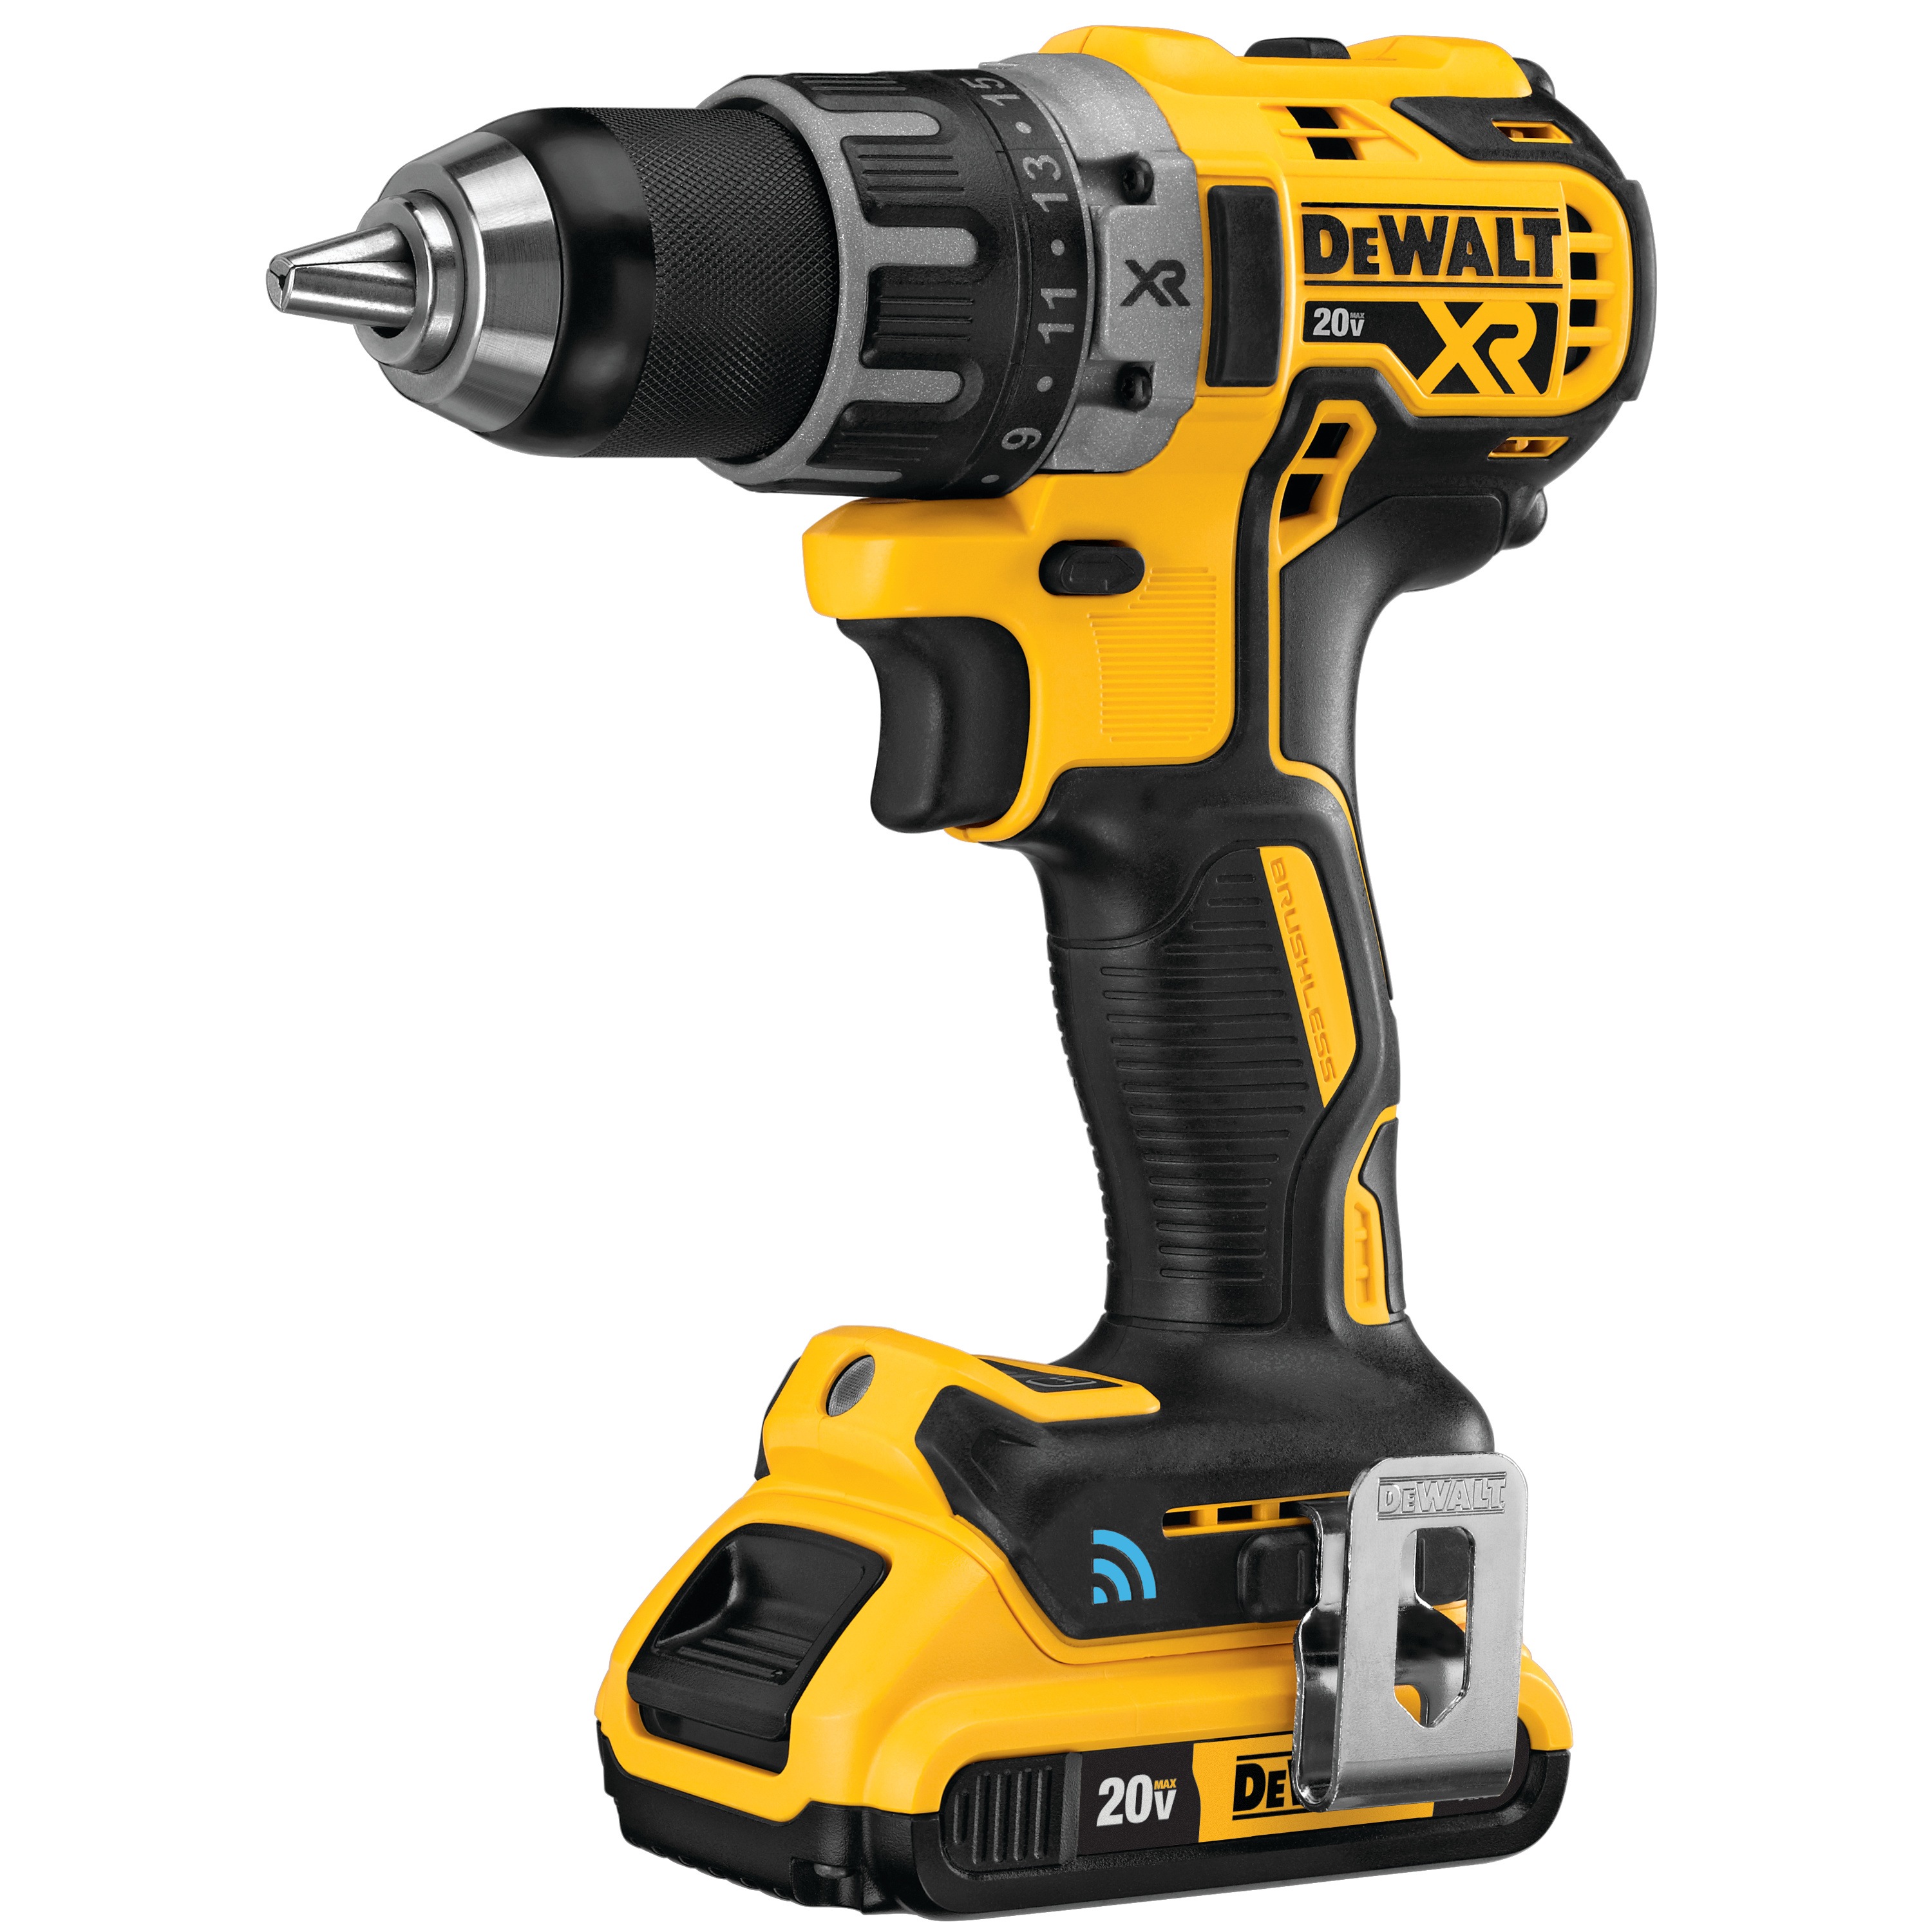 XR Cordless Compact drill driver with Tool Connect and battery.